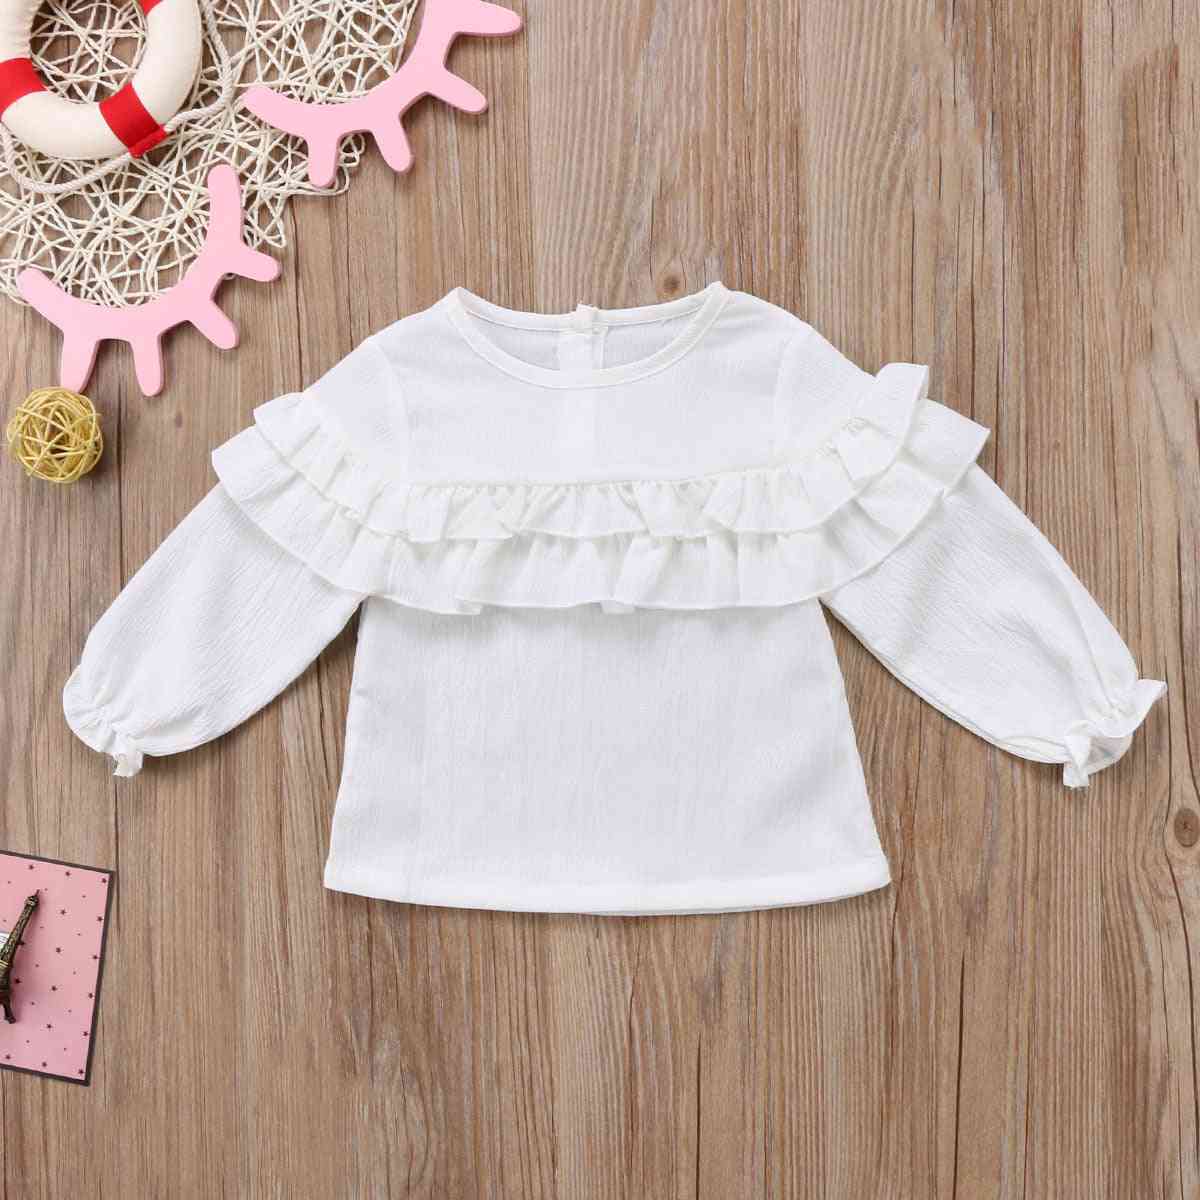 Infant Baby Girl Cotton Ruffles Long Sleeve Blouse Shirt / Tops Clothes